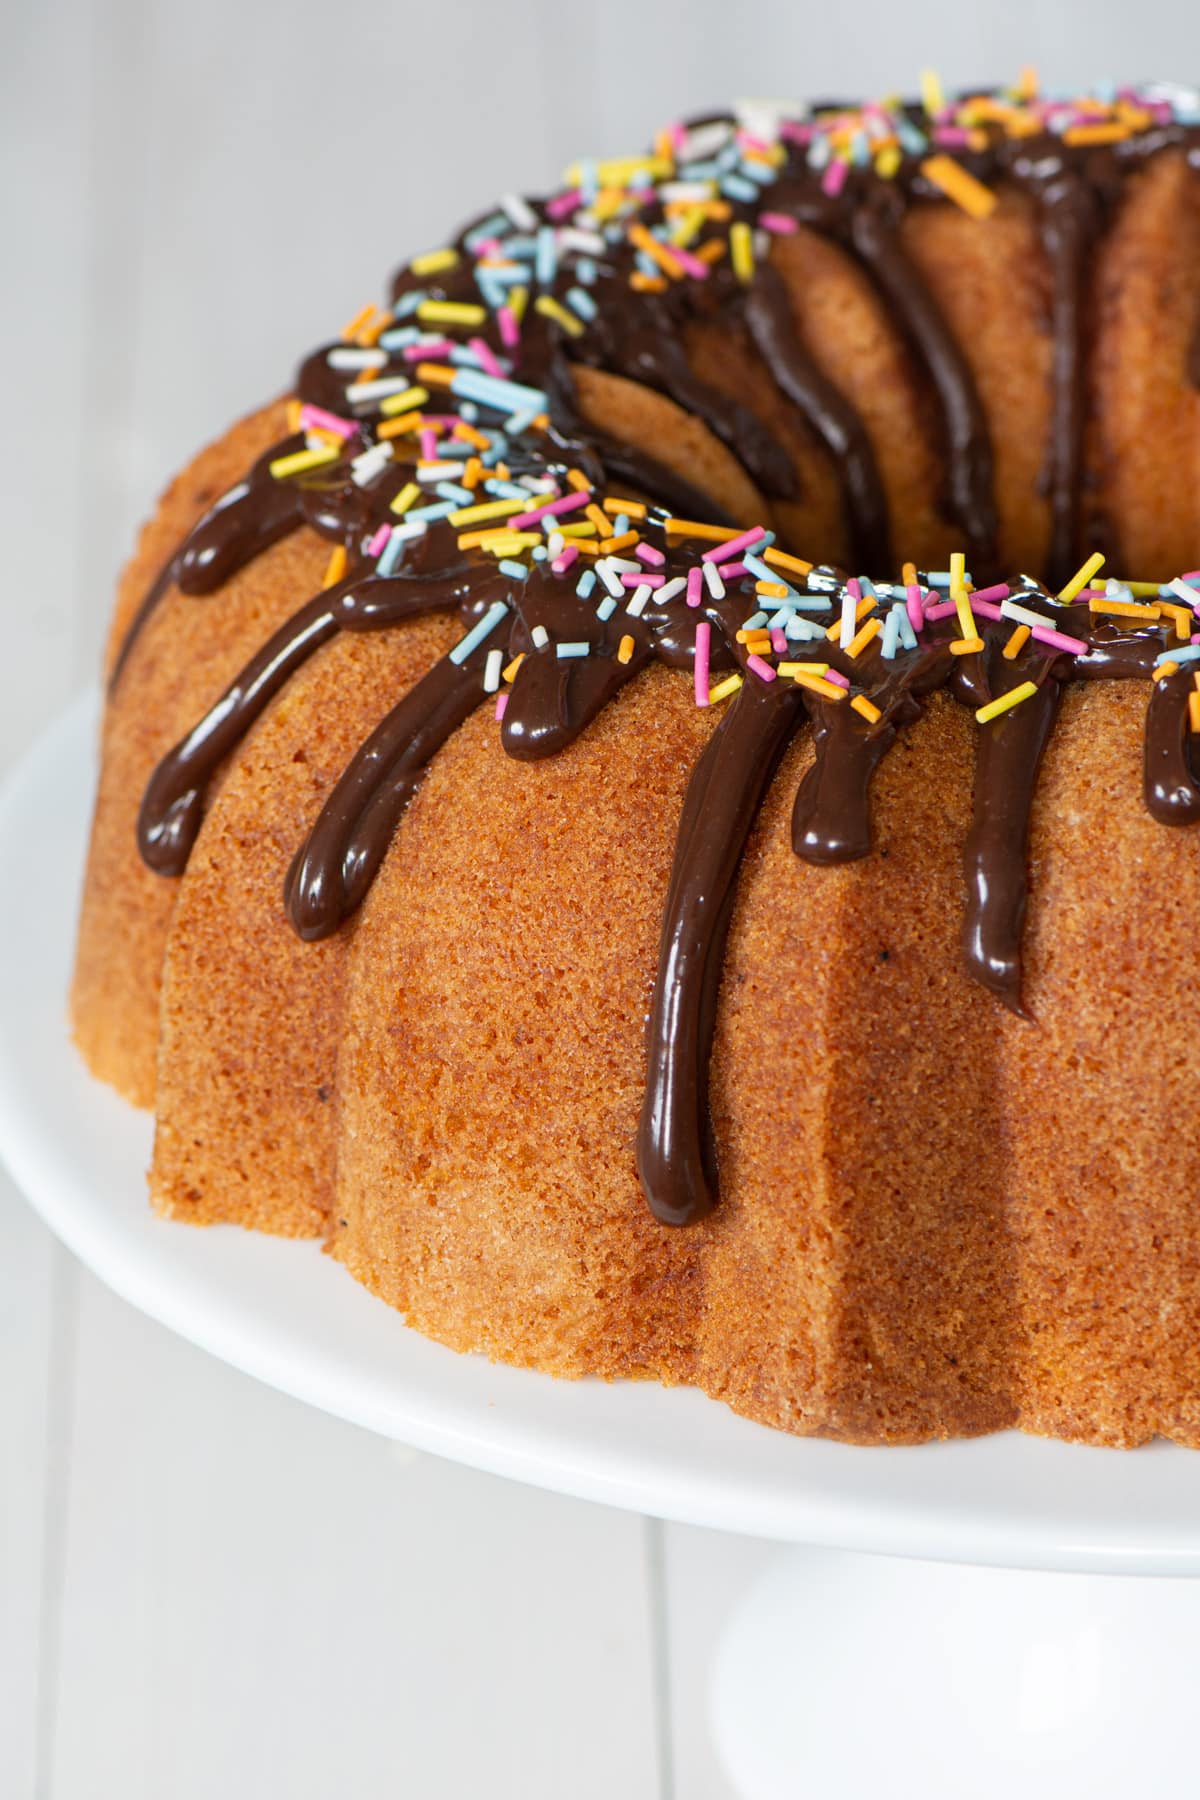 Bundt cake topped with ganache and sprinkles.